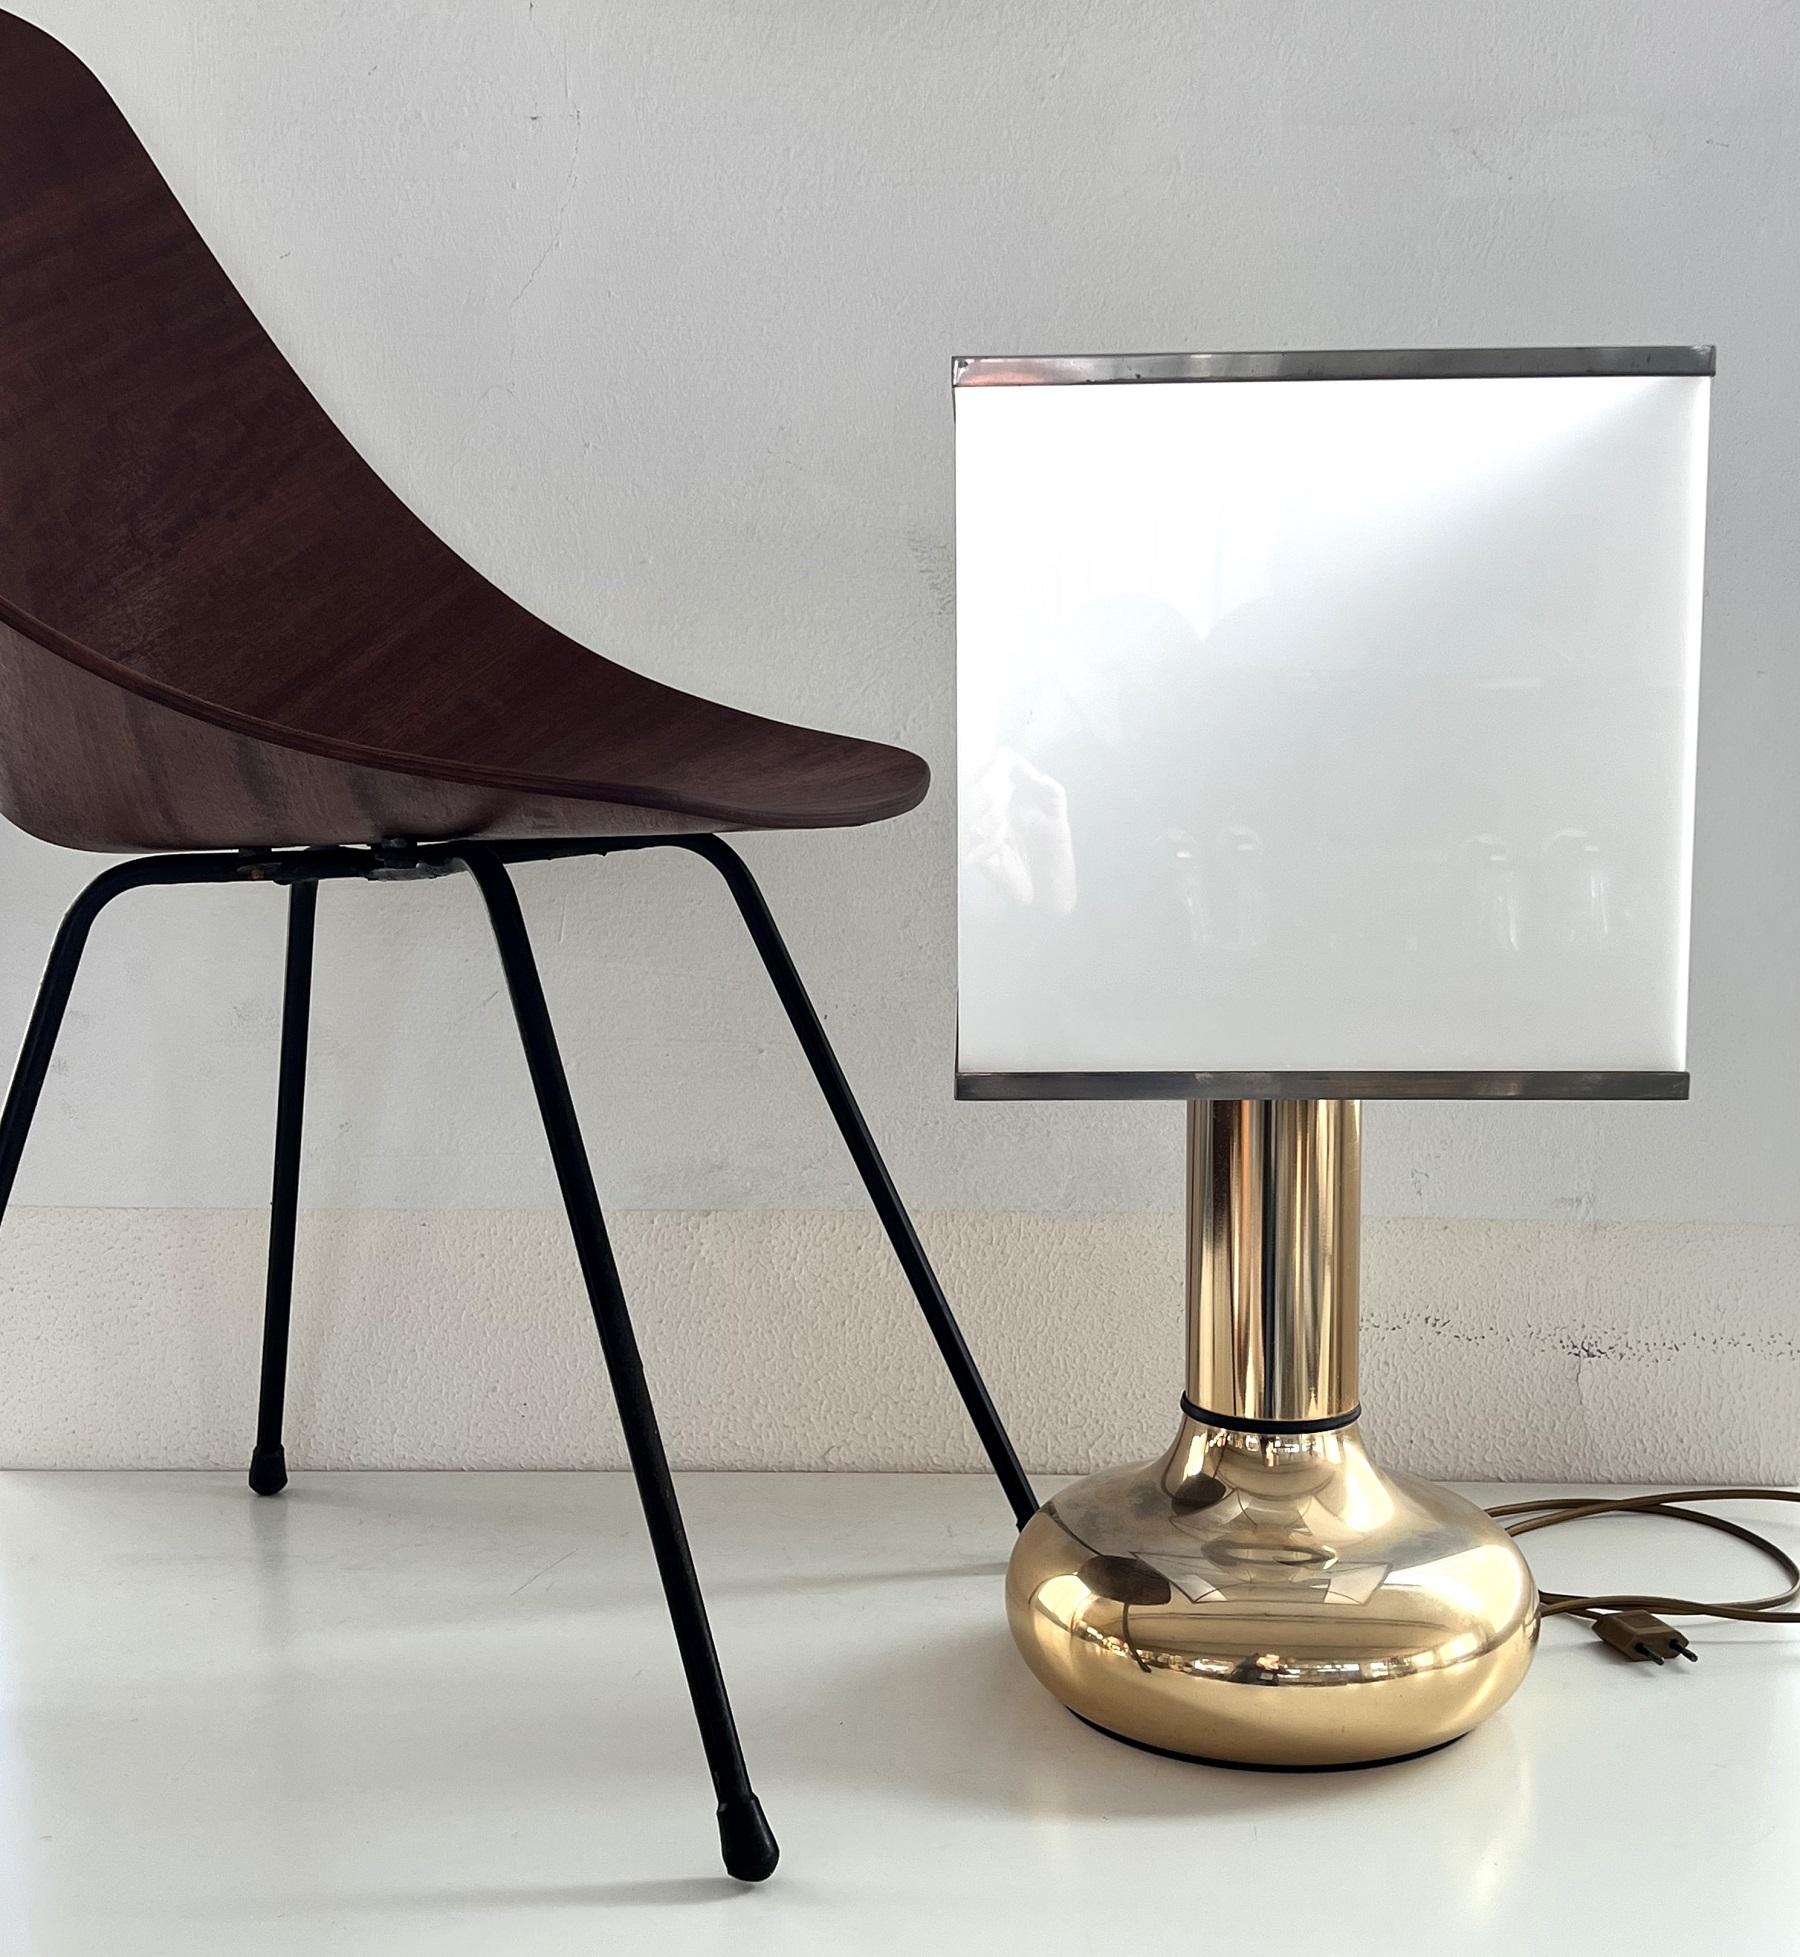 Gorgeous table lamp made of a metal base with brass finish in the typical style of the Italian 70s.
Made by Lampter Milano (see label)
The square lampshade is made of opaline white perspex (plastic) with metal edgings with gold finish.
The golden